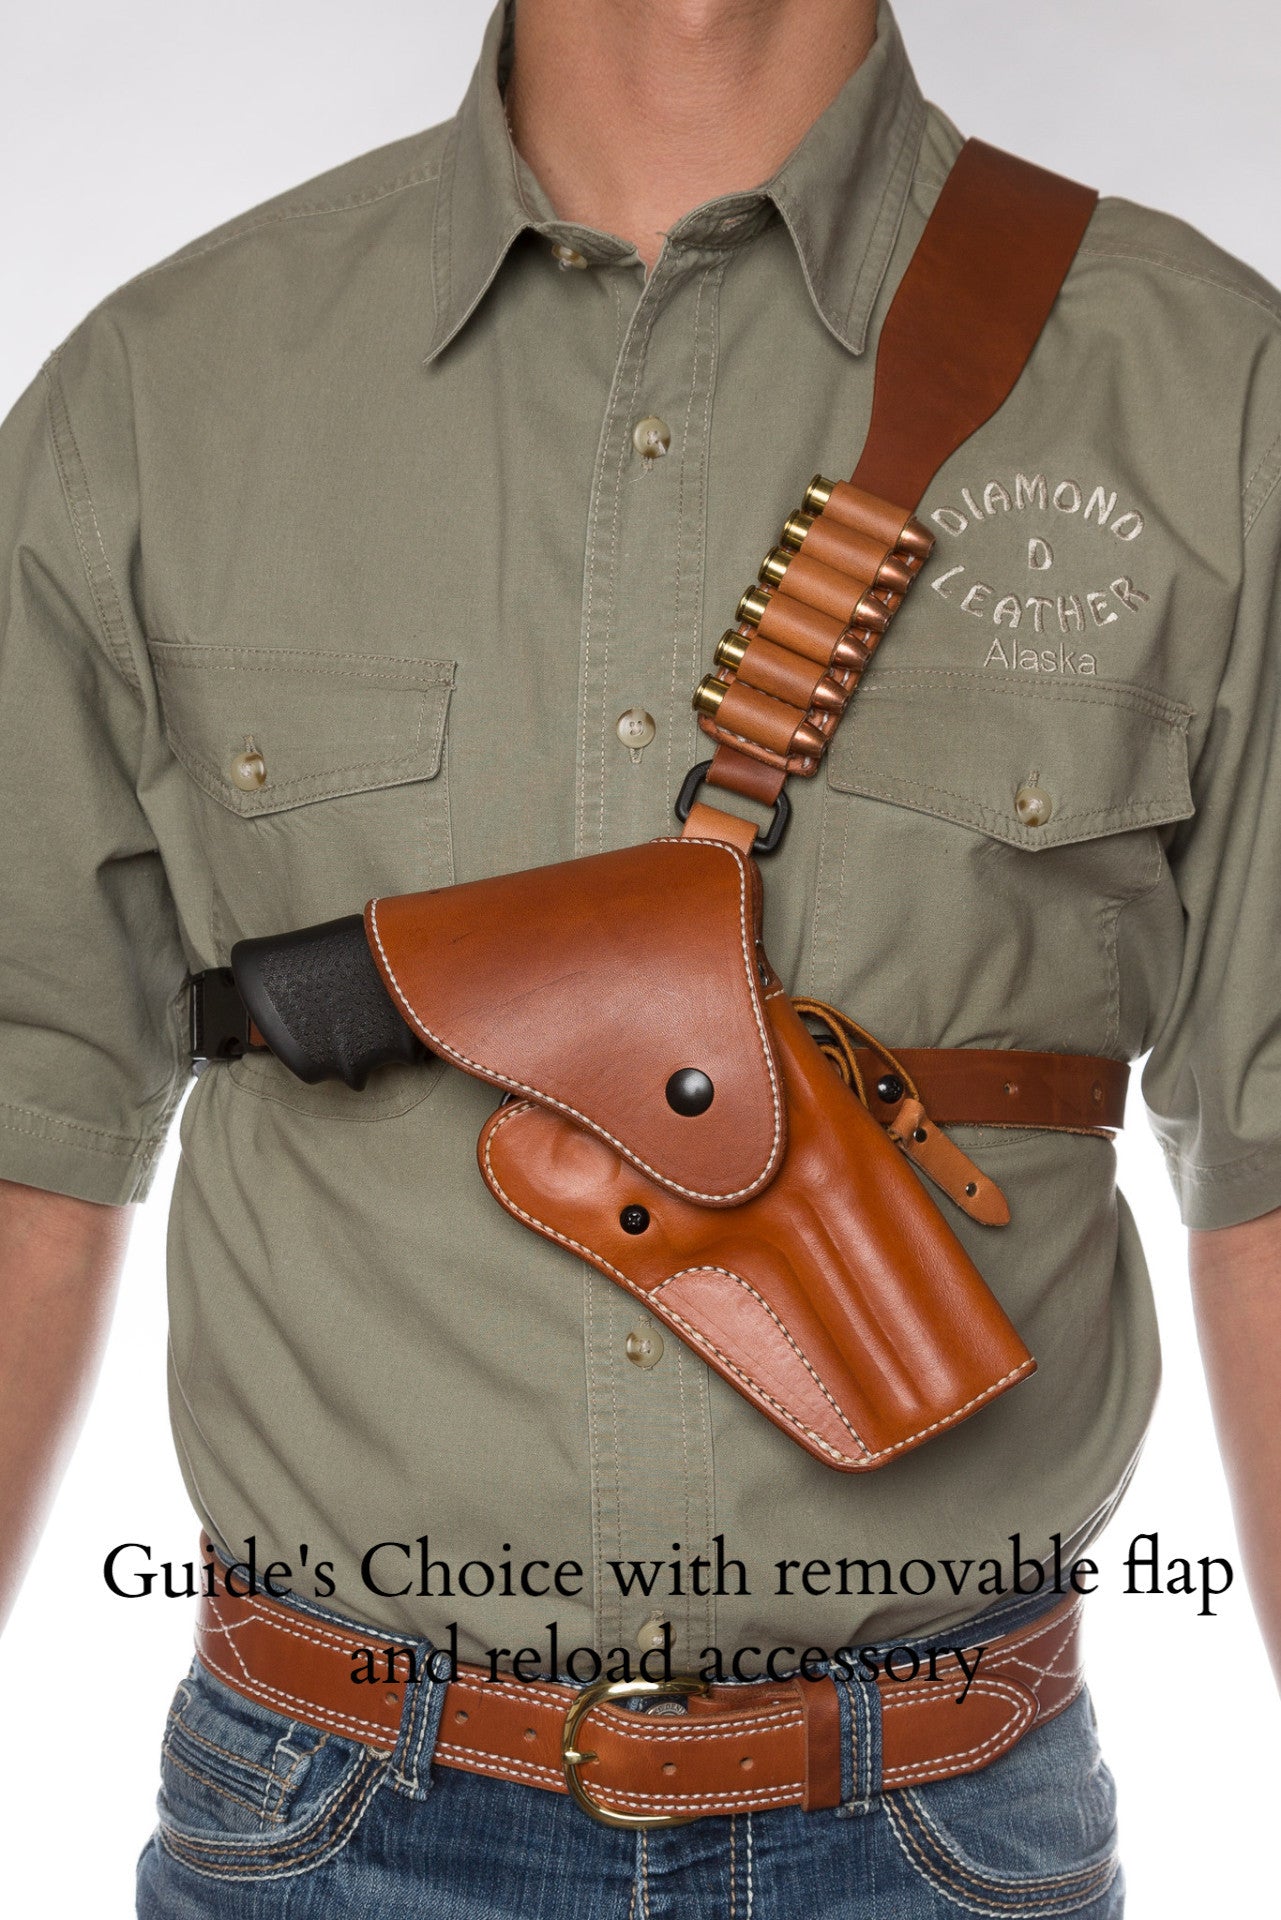 Guides Choice™ Leather Chest Holster, the ULTIMATE outdoor gun